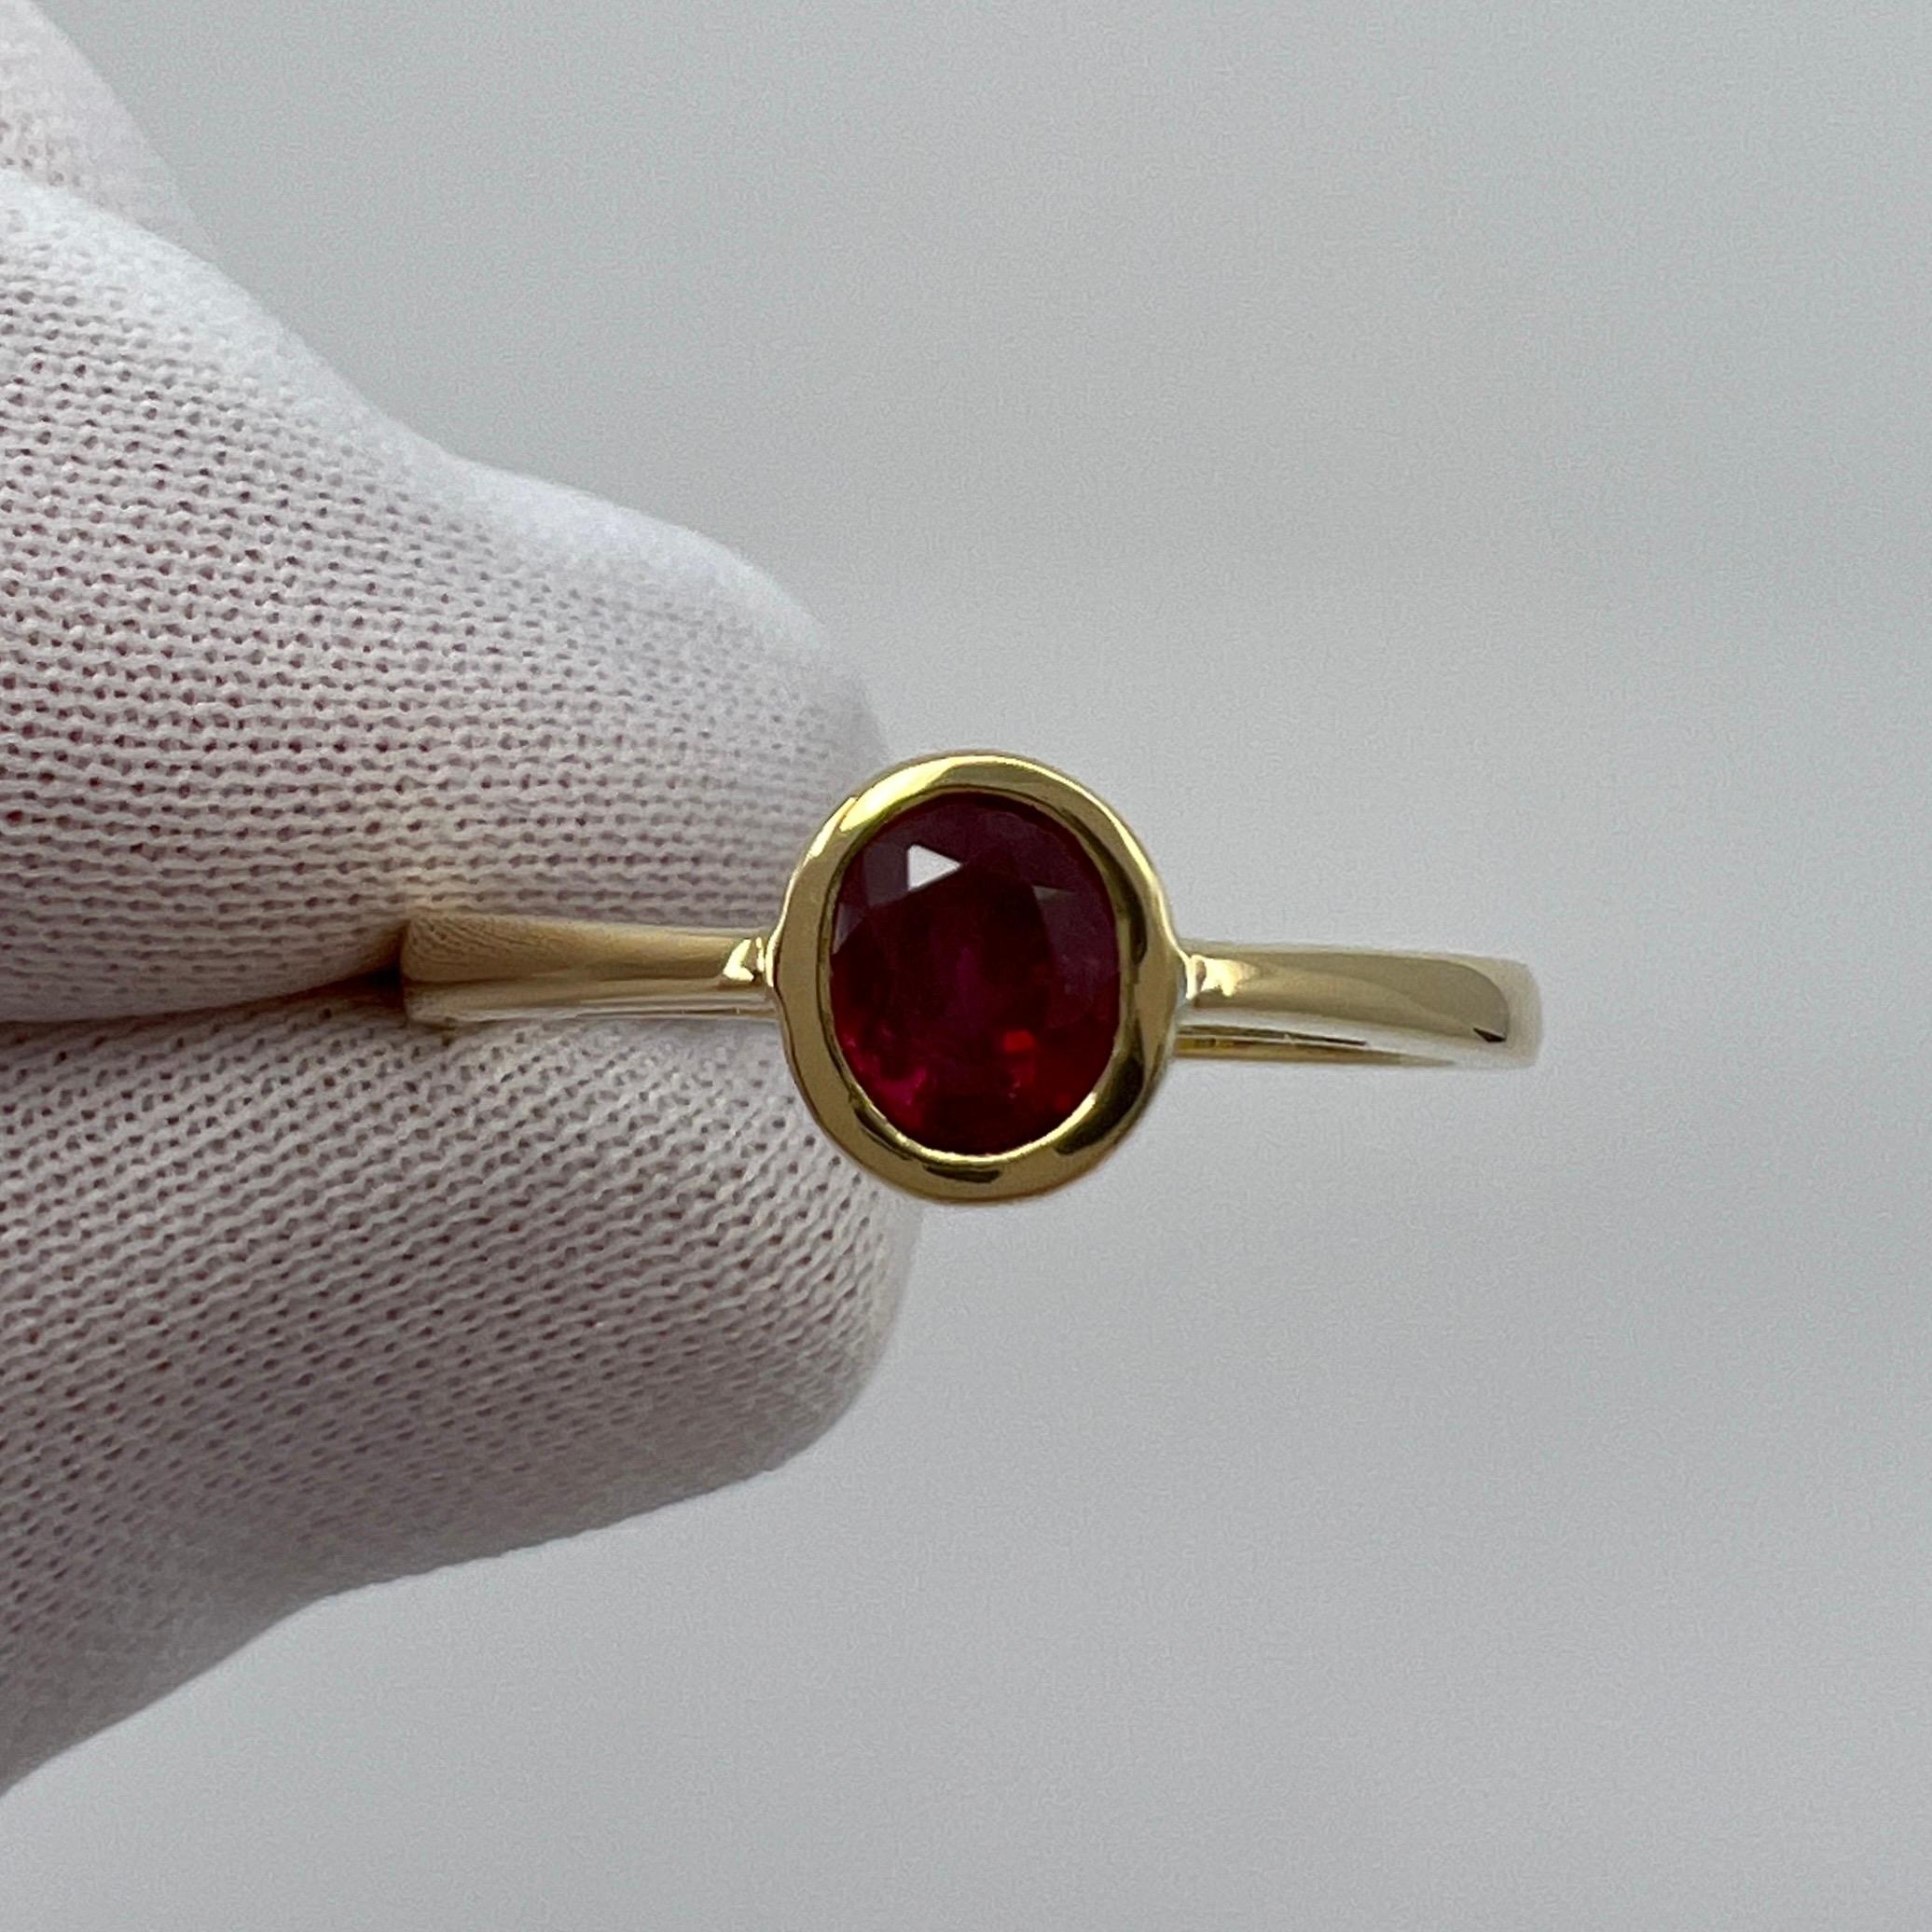 0.75ct Vivid Red Ruby Oval Cut 18k Yellow Gold Bezel Rubover Solitaire Ring For Sale 5